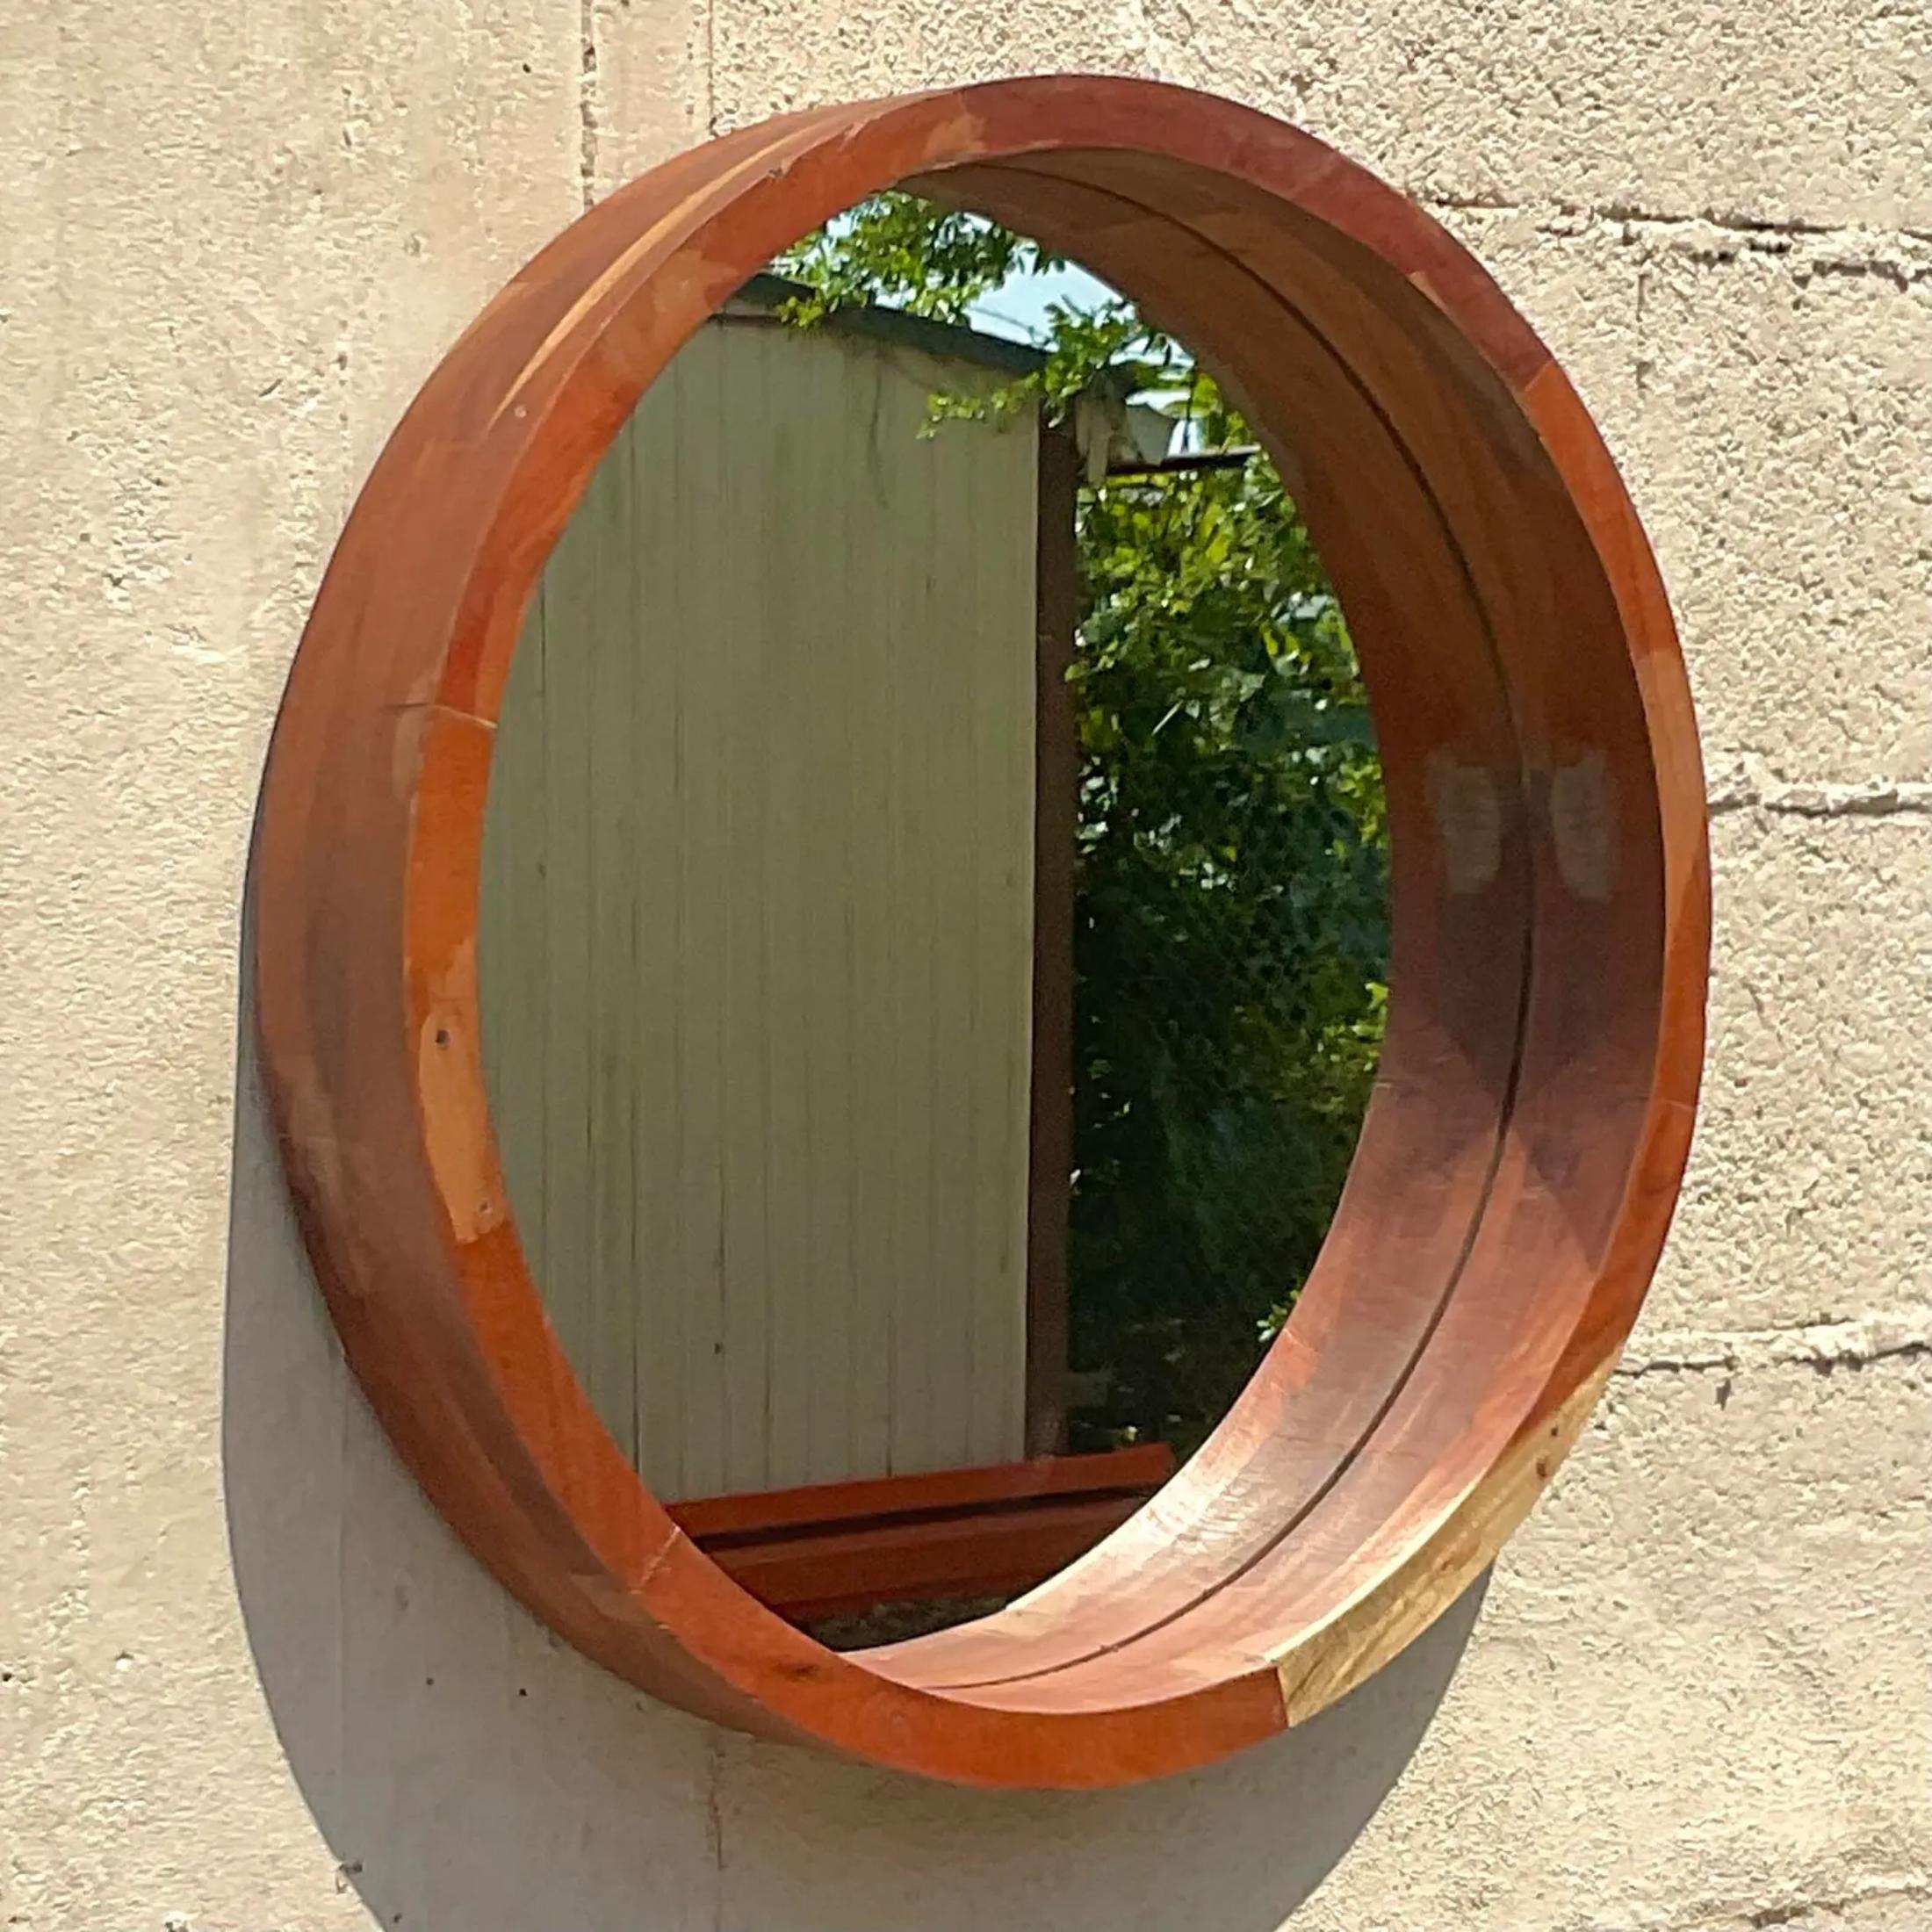 A fabulous vintage Boho round wooden mirror. Beautiful wood grain detail in a clean contemporary design. Acquired from a Palm Beach estate